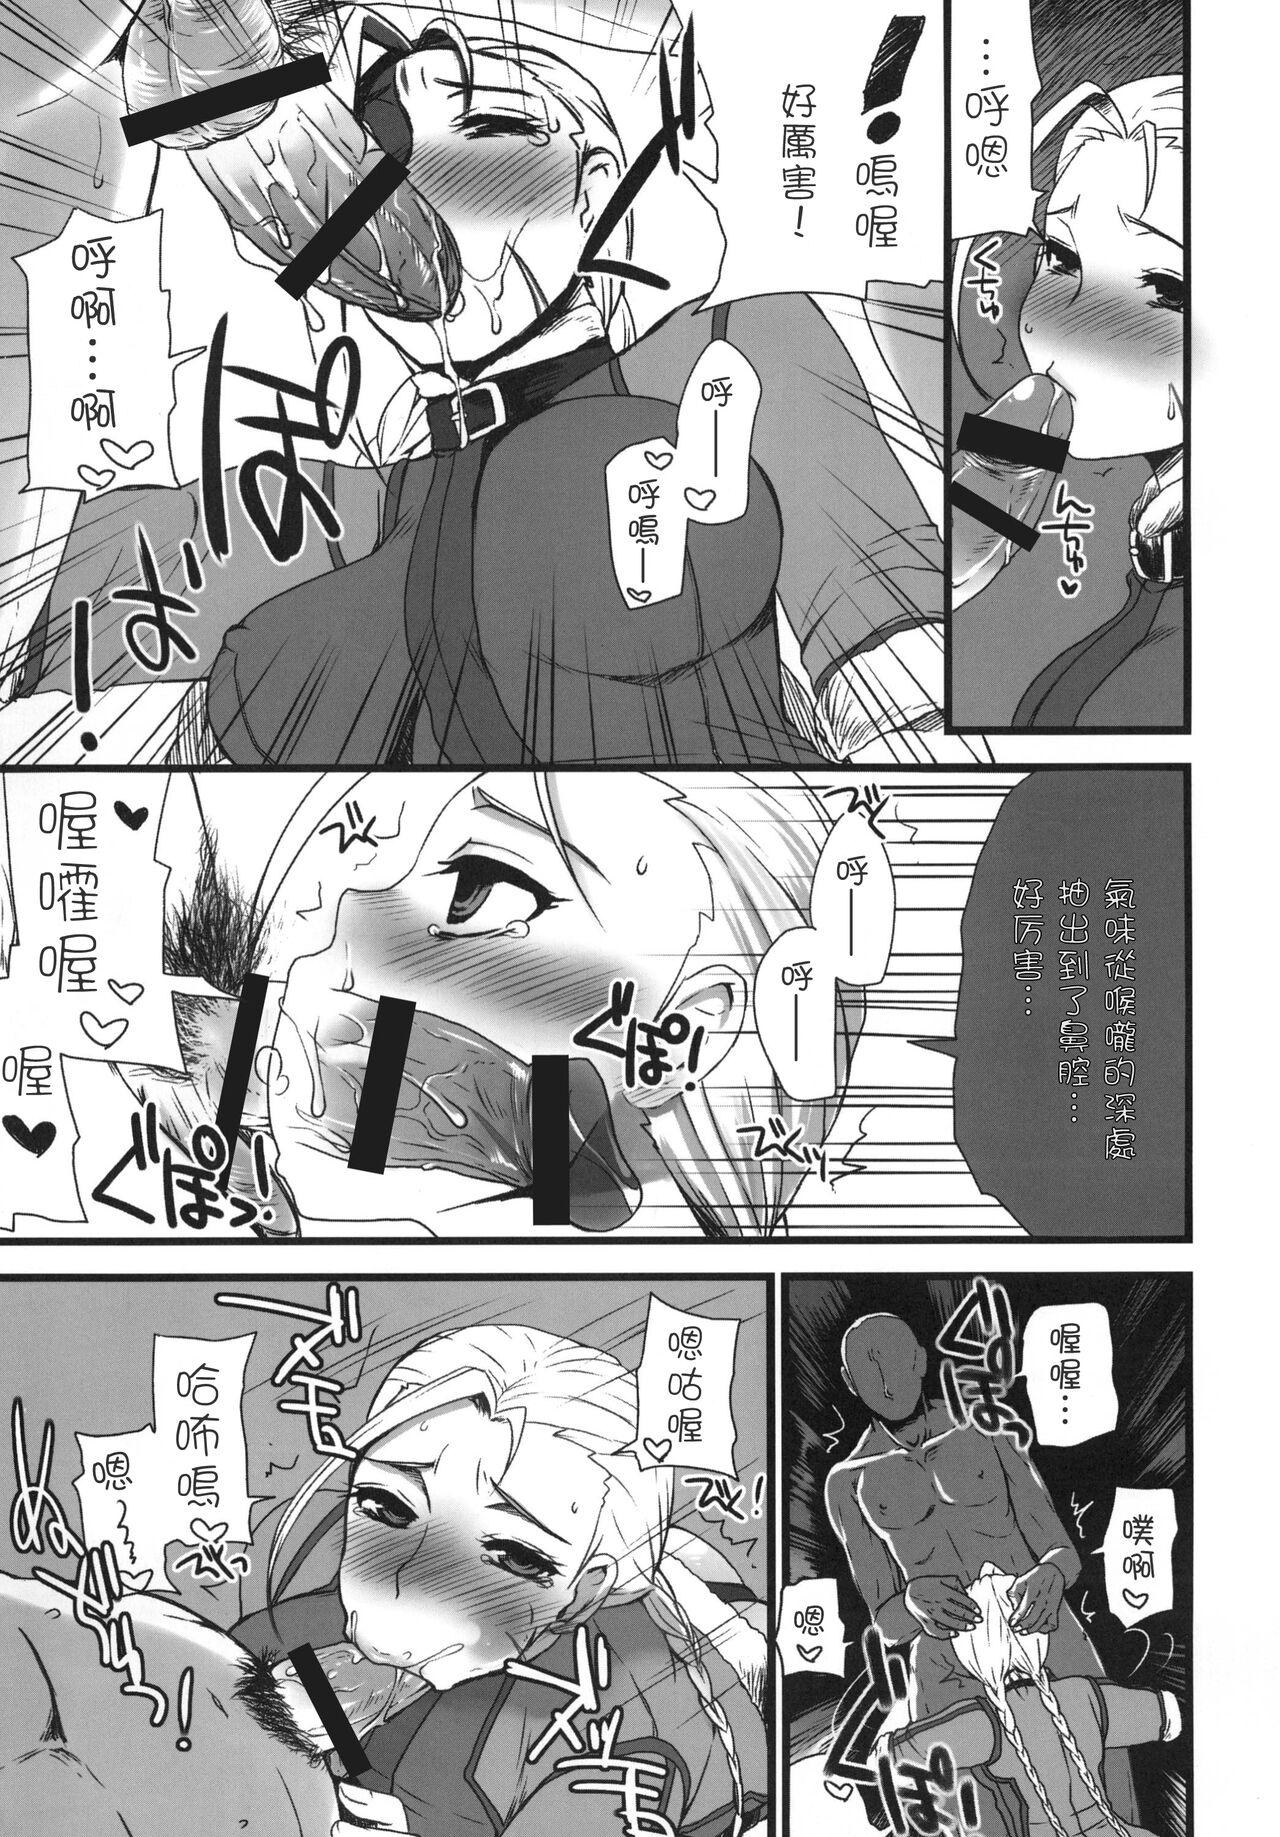 Prima Mona-Lisa Overdrive | 重啟蒙娜麗莎 - Street fighter Relax - Page 7